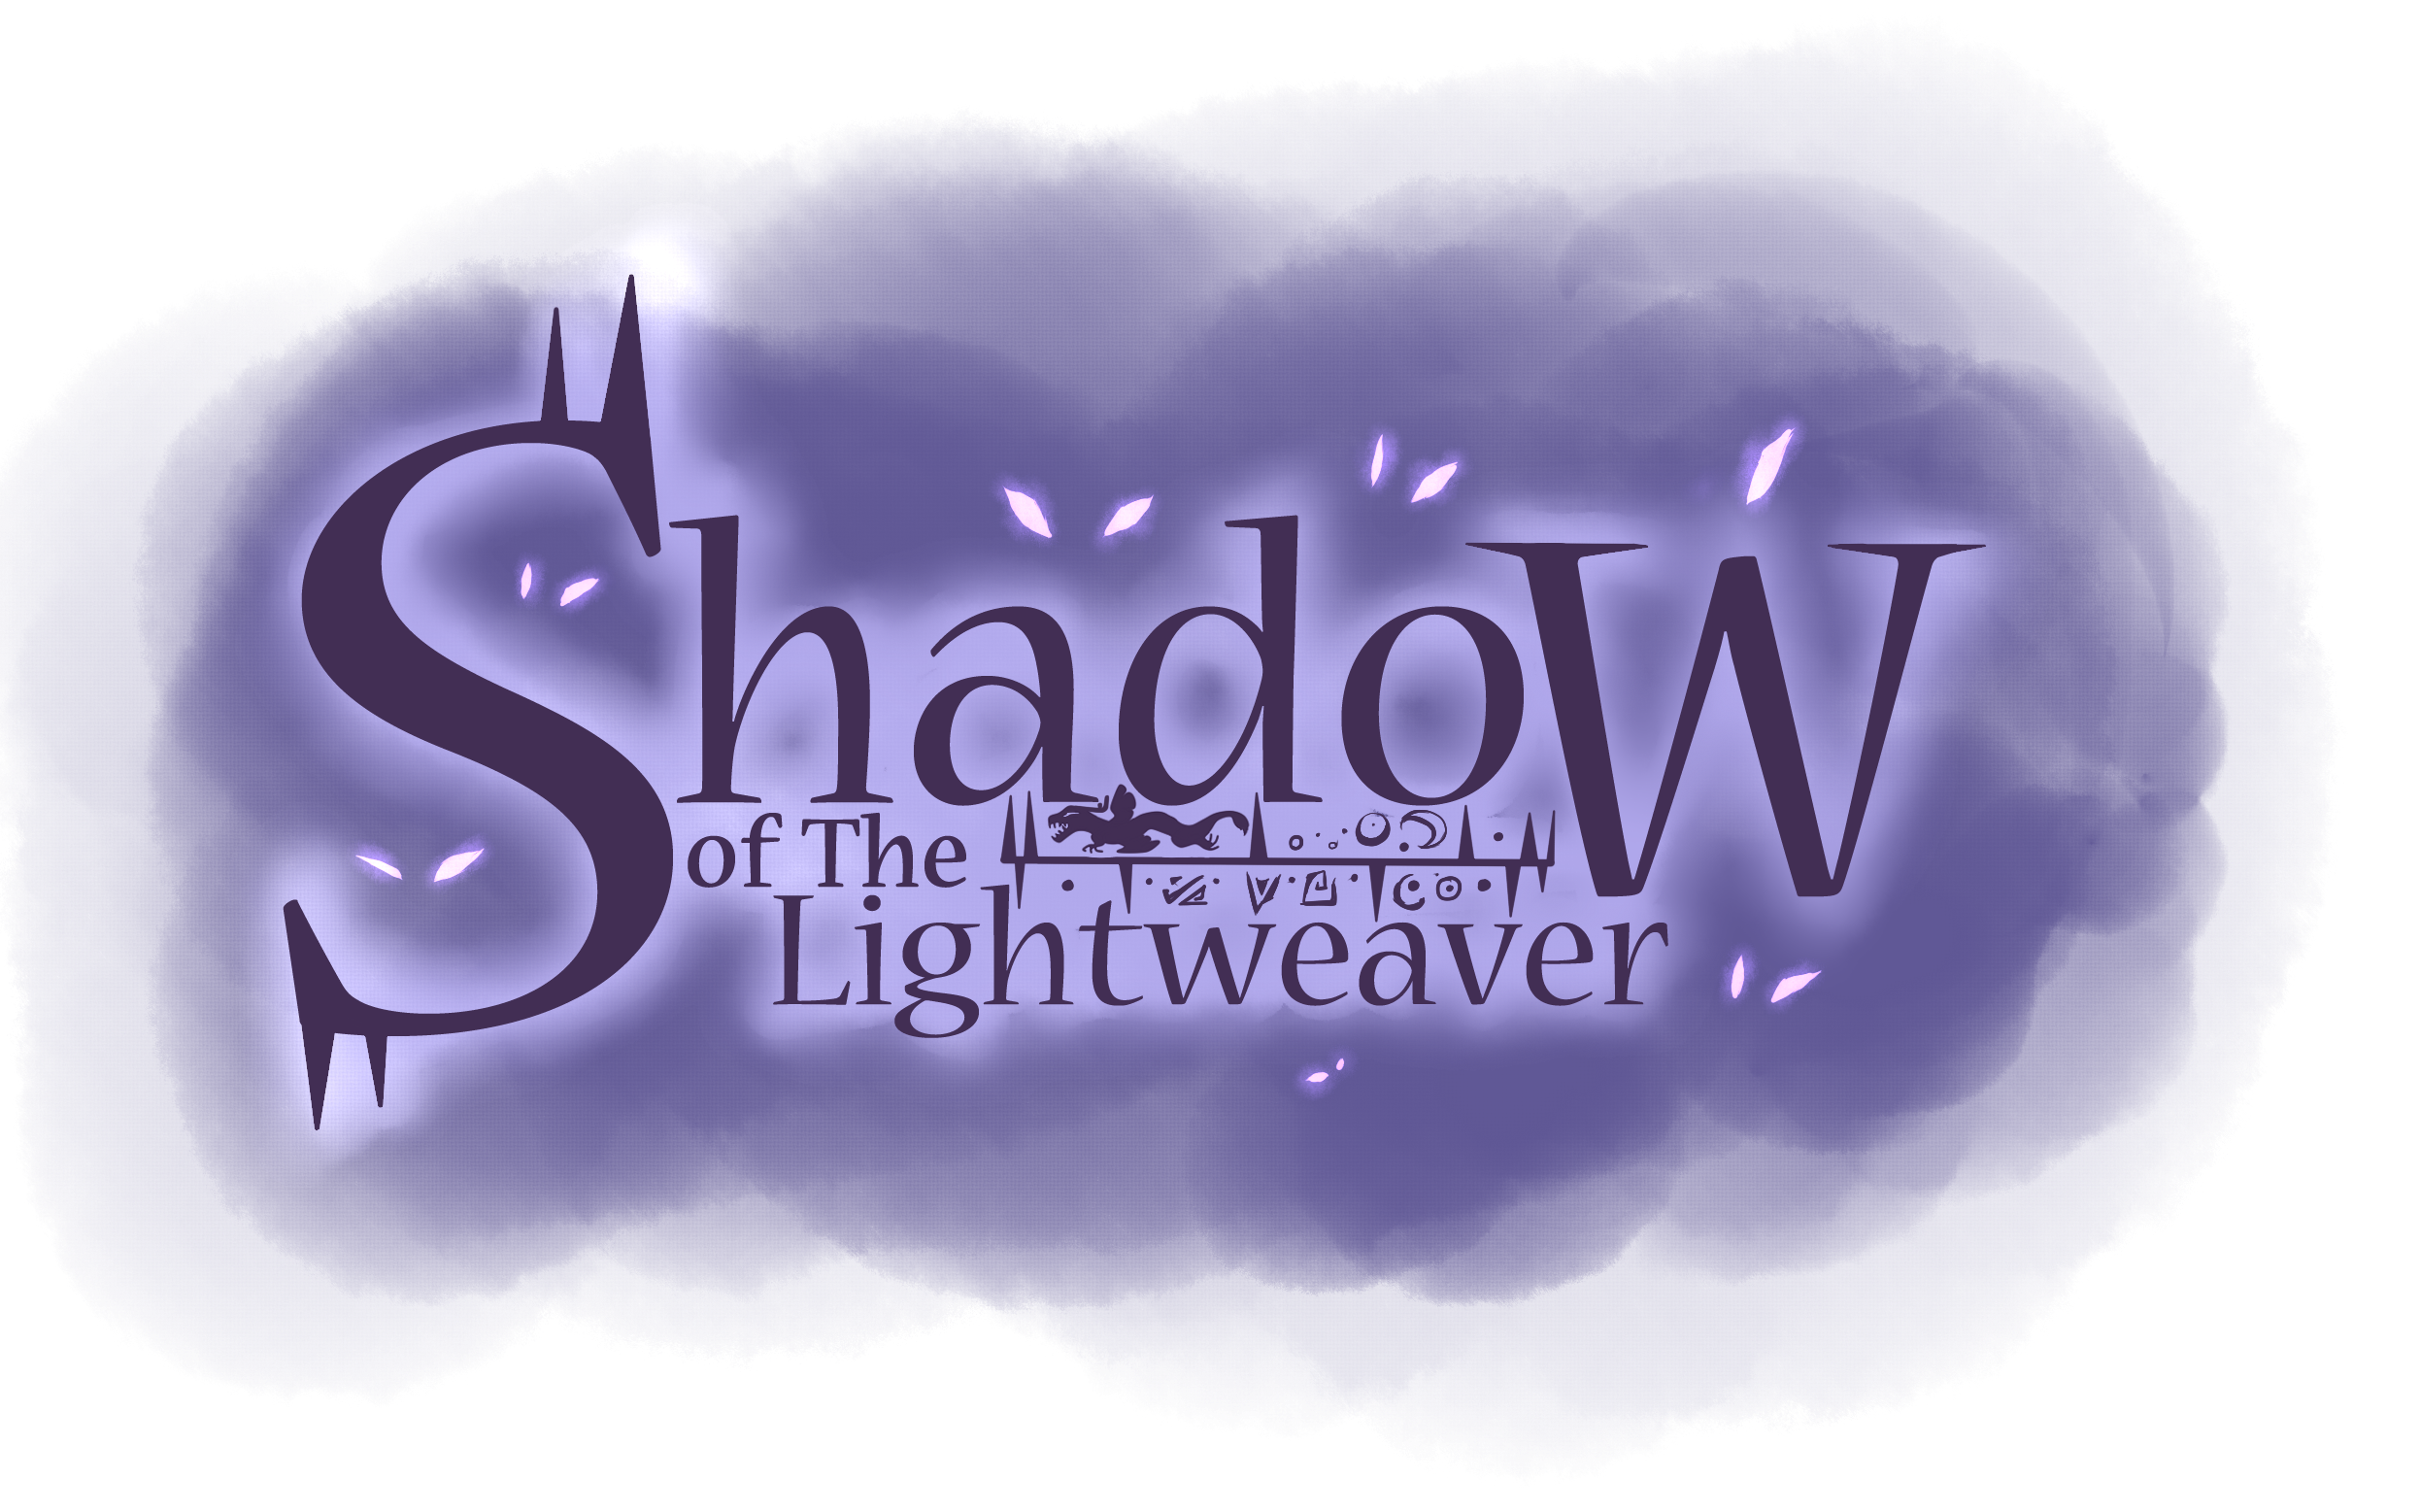 shadowofthelightweaver_title_by_onefoxmanywords-db3jl20.png